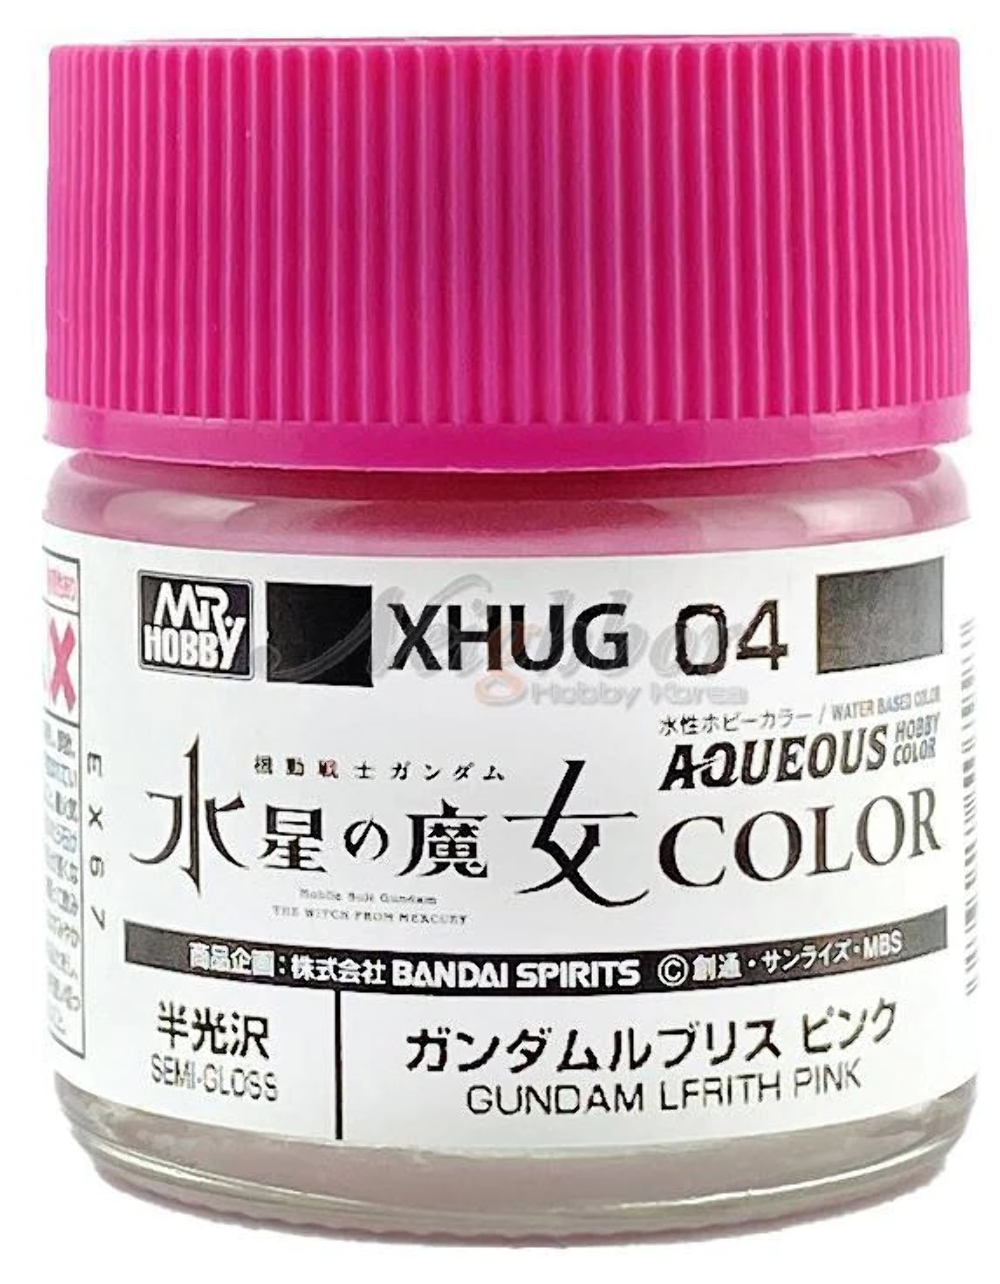 Mr. Hobby Aqueous Hobby Color Witch From Mercury XHUG04 Gundam Lfrith Pink Semi Gloss 10ml Bottle